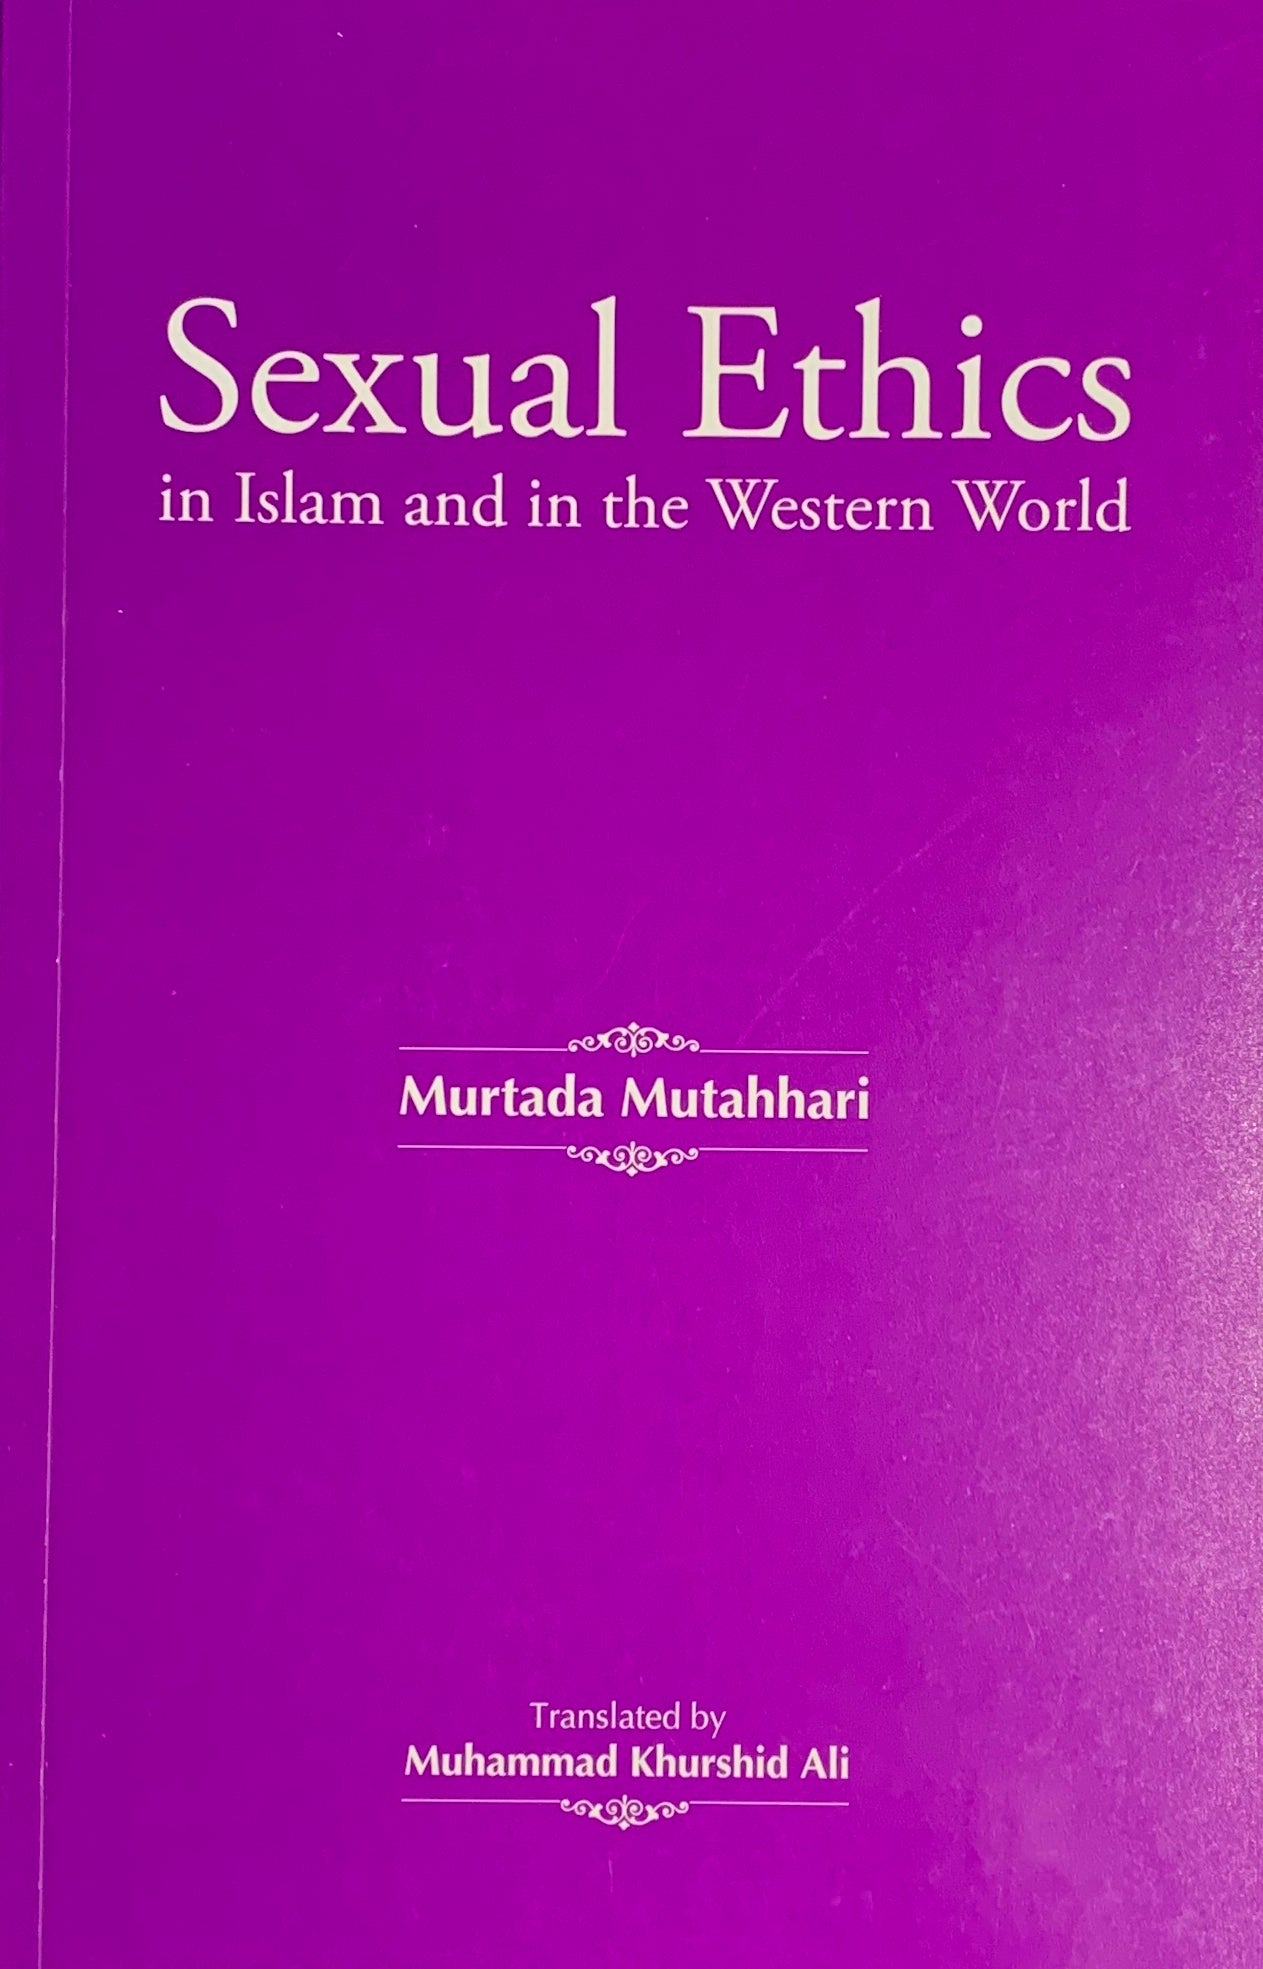 Sexual Ethics in Islam and in the Western World pic